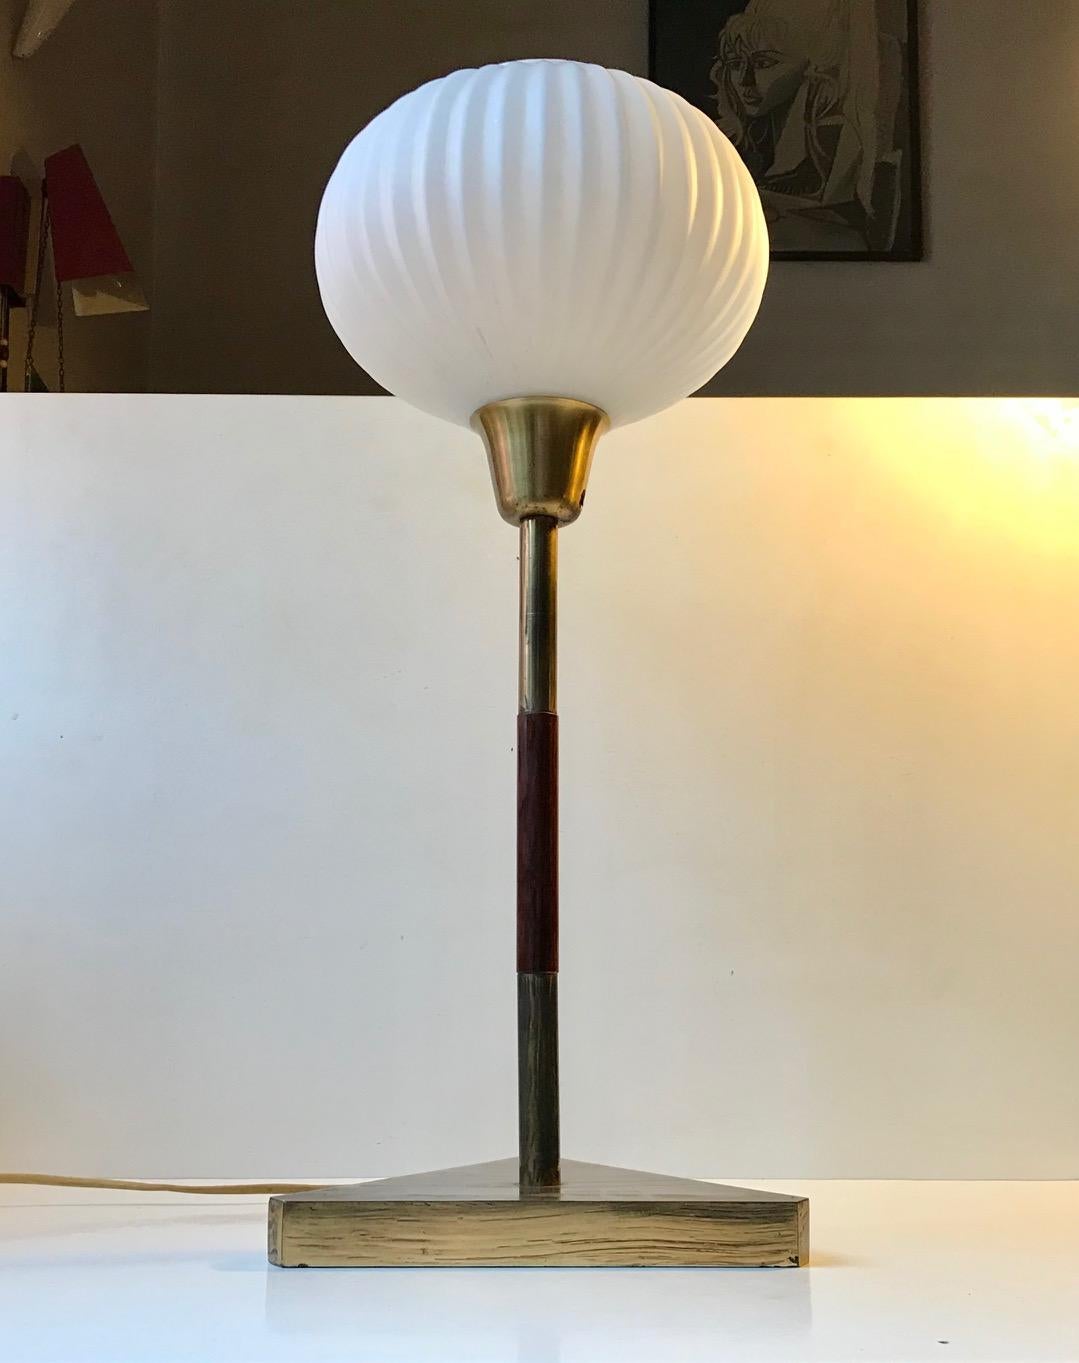 Tall simplistically composed table lamp in brass and mahogany. Mounted with a fluted spherical opaline glass shade. It features a triangular base that emphasizes the clean and well balanced Art Deco lines. It was manufactured and designed